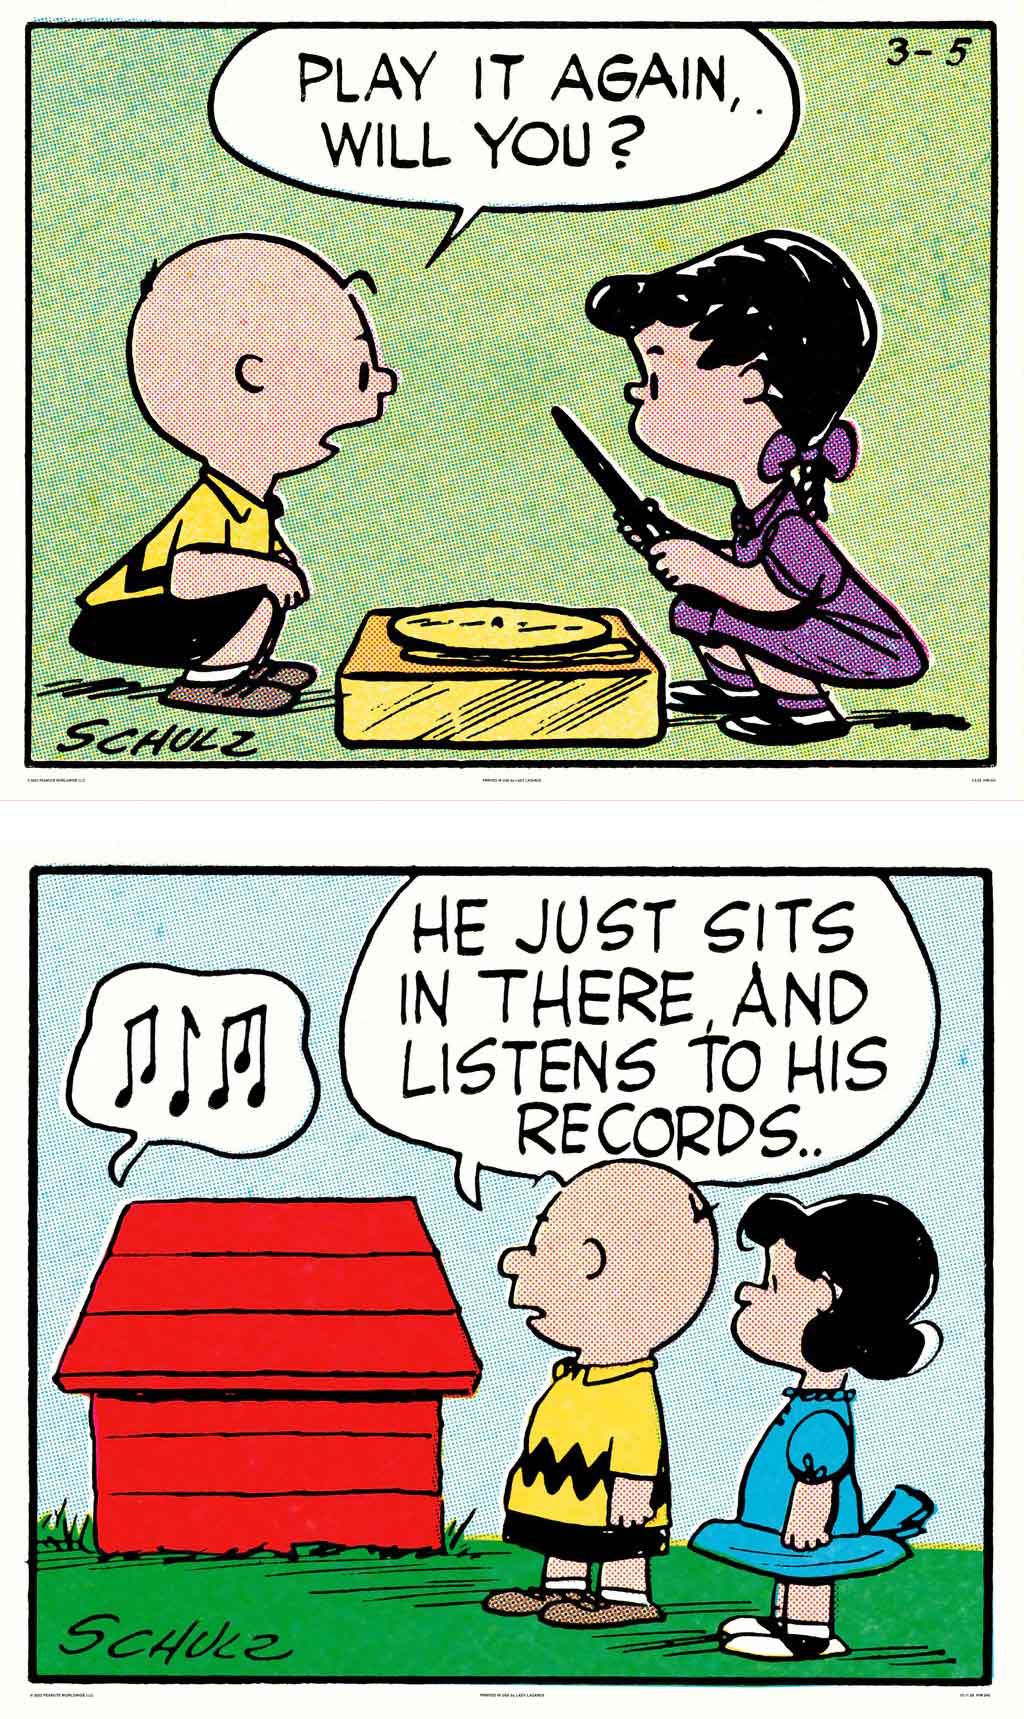 Peanuts - Record Store Day by Charles Schulz